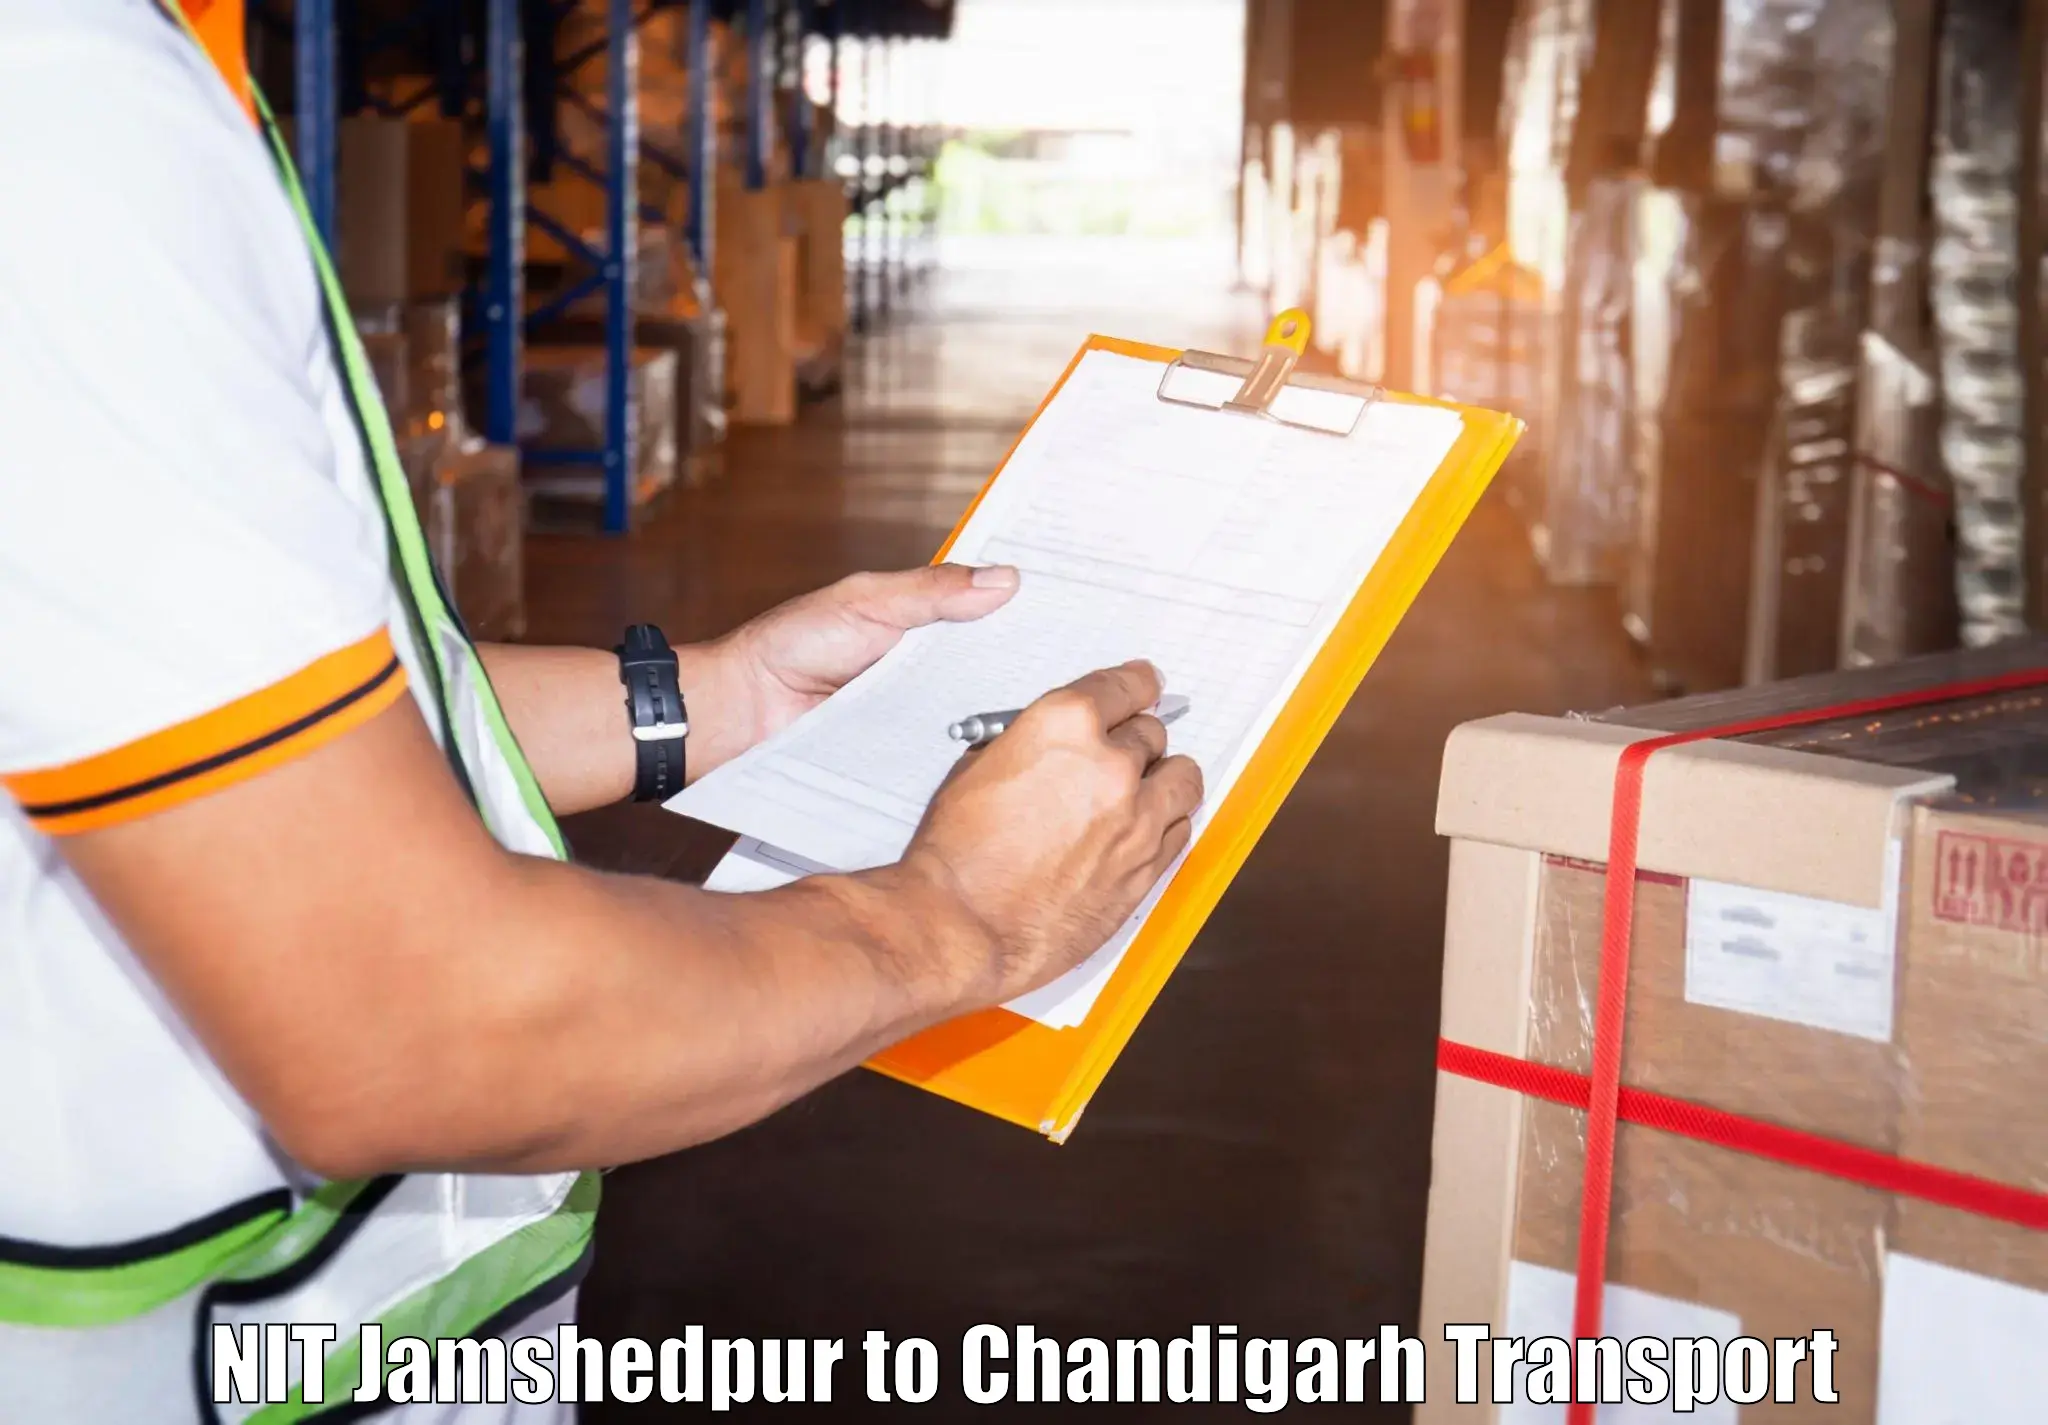 Goods delivery service NIT Jamshedpur to Chandigarh